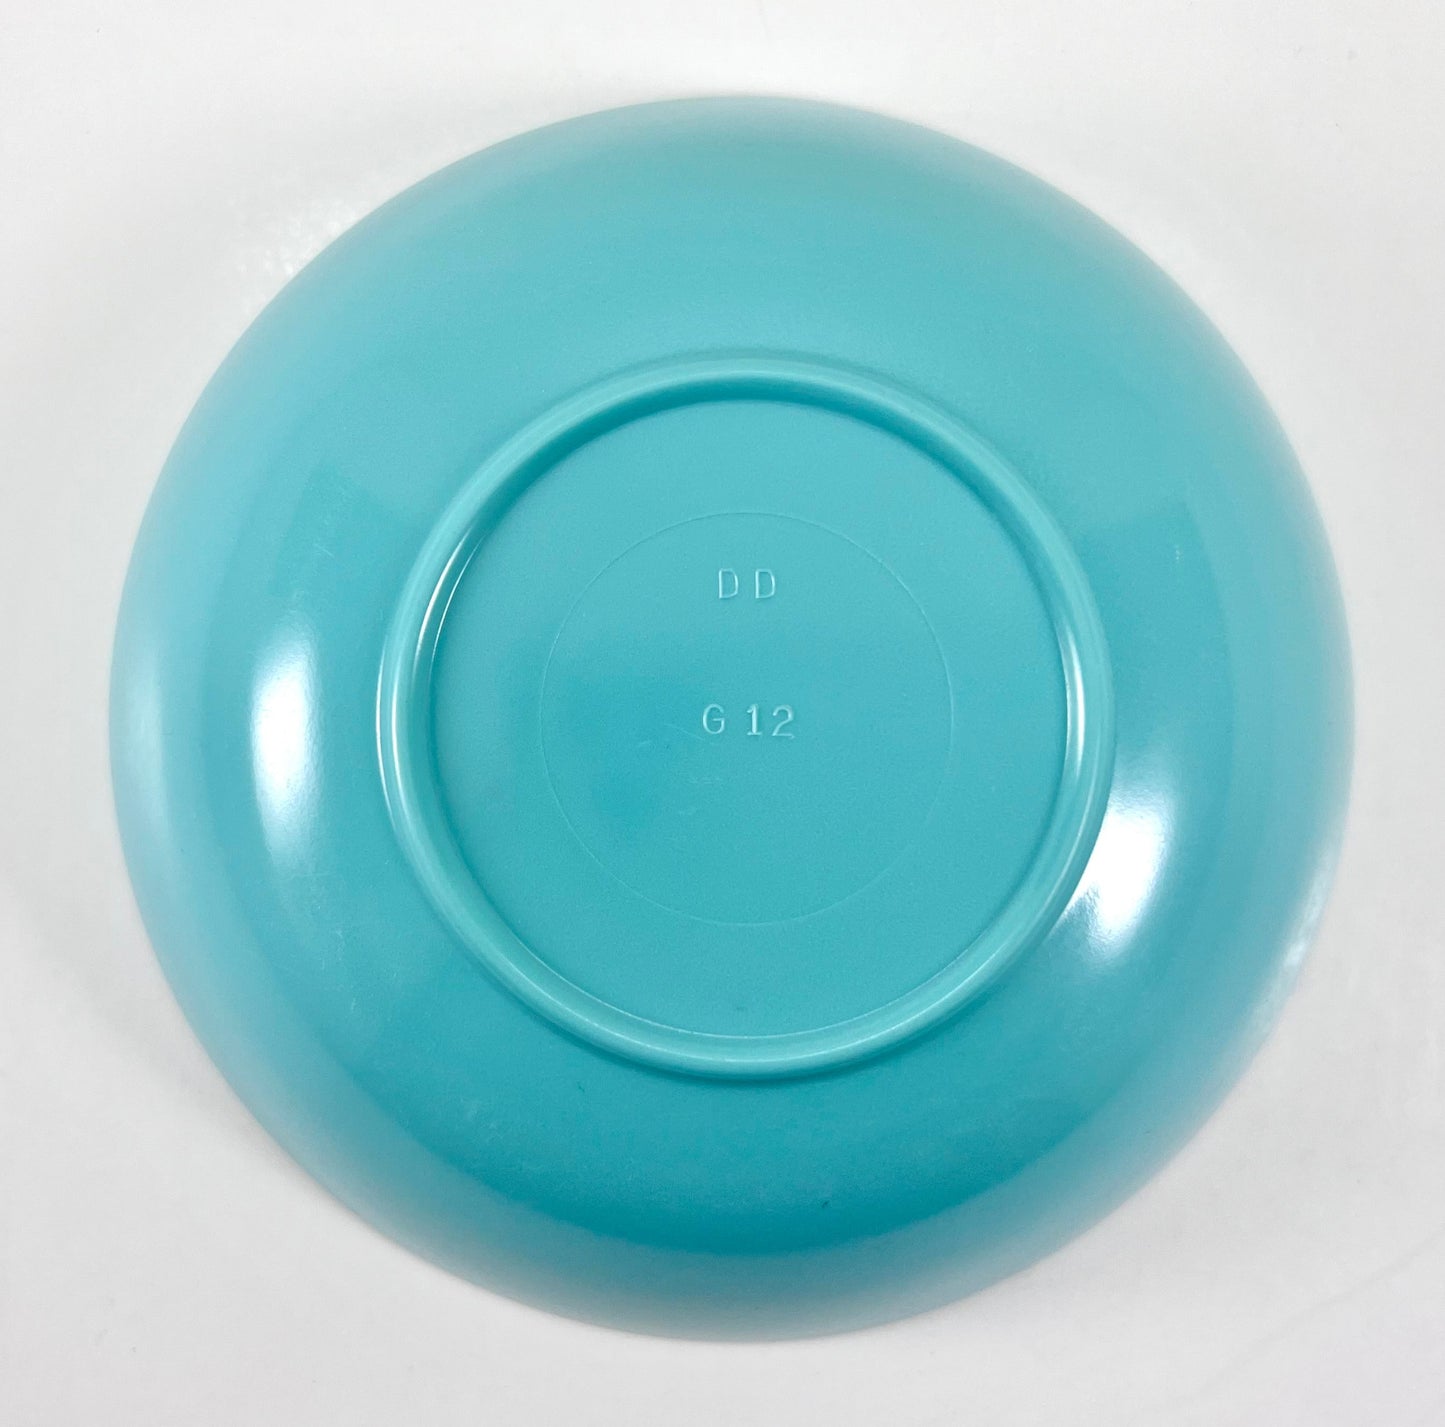 Mid-century Melamine Turquoise Poppies Dinnerware with Serving Pieces. c. 1965